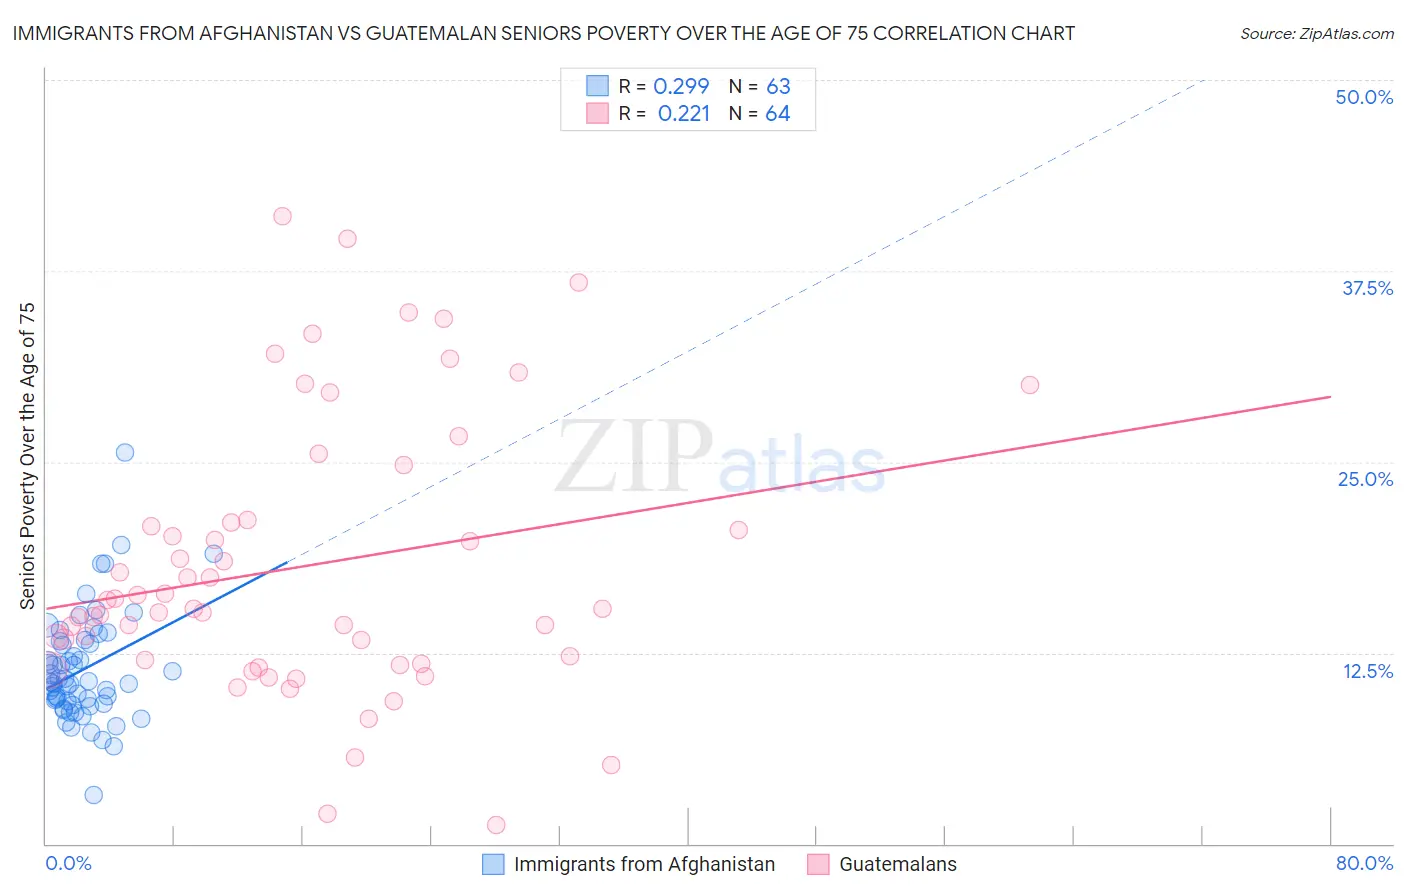 Immigrants from Afghanistan vs Guatemalan Seniors Poverty Over the Age of 75